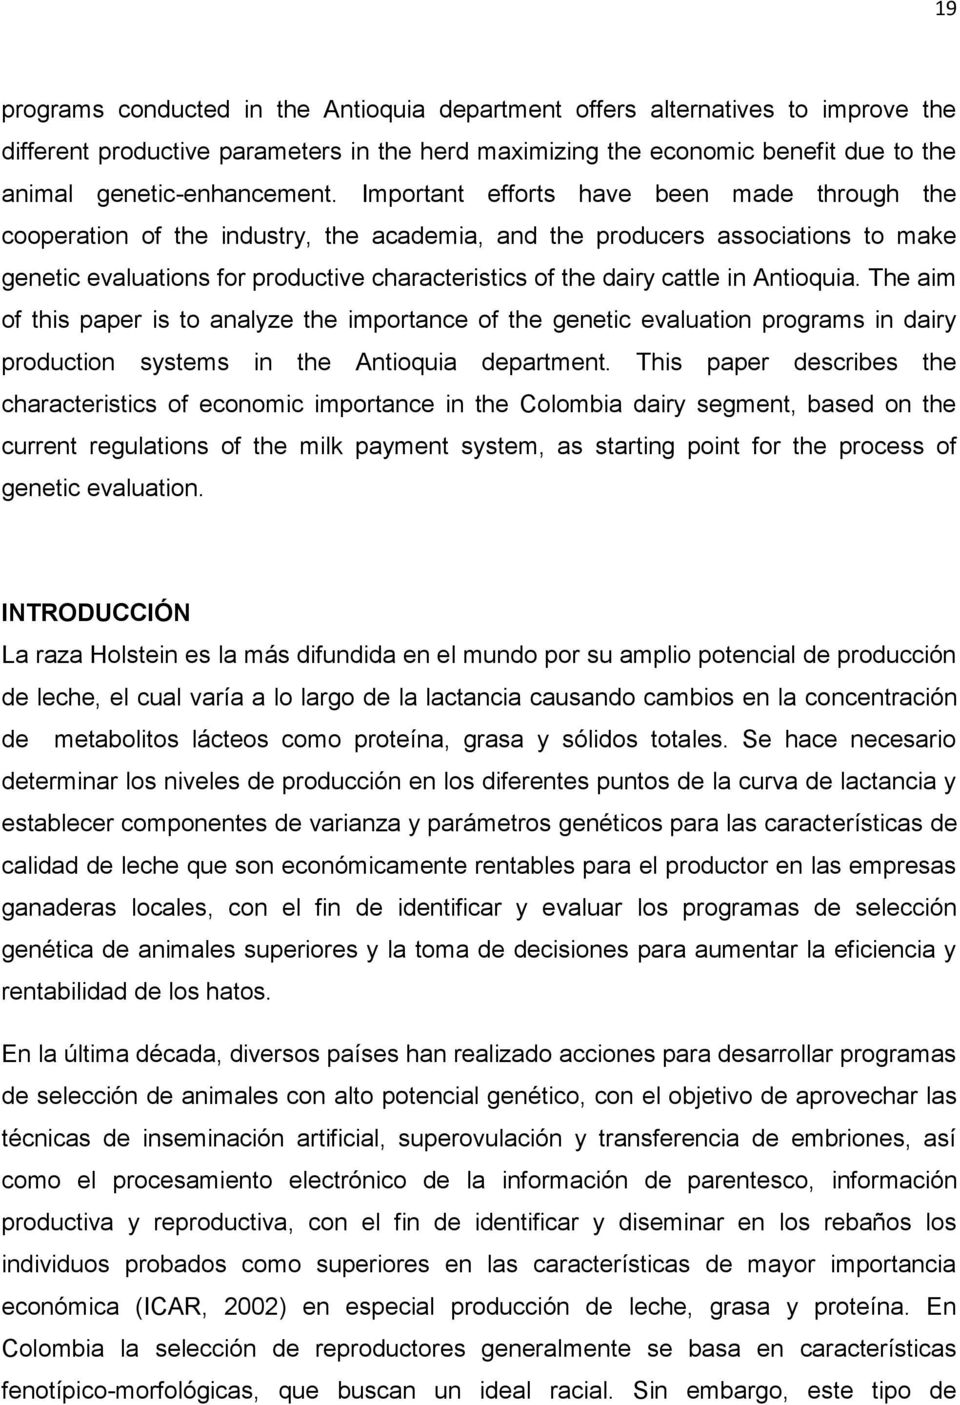 in Antioquia. The aim of this paper is to analyze the importance of the genetic evaluation programs in dairy production systems in the Antioquia department.